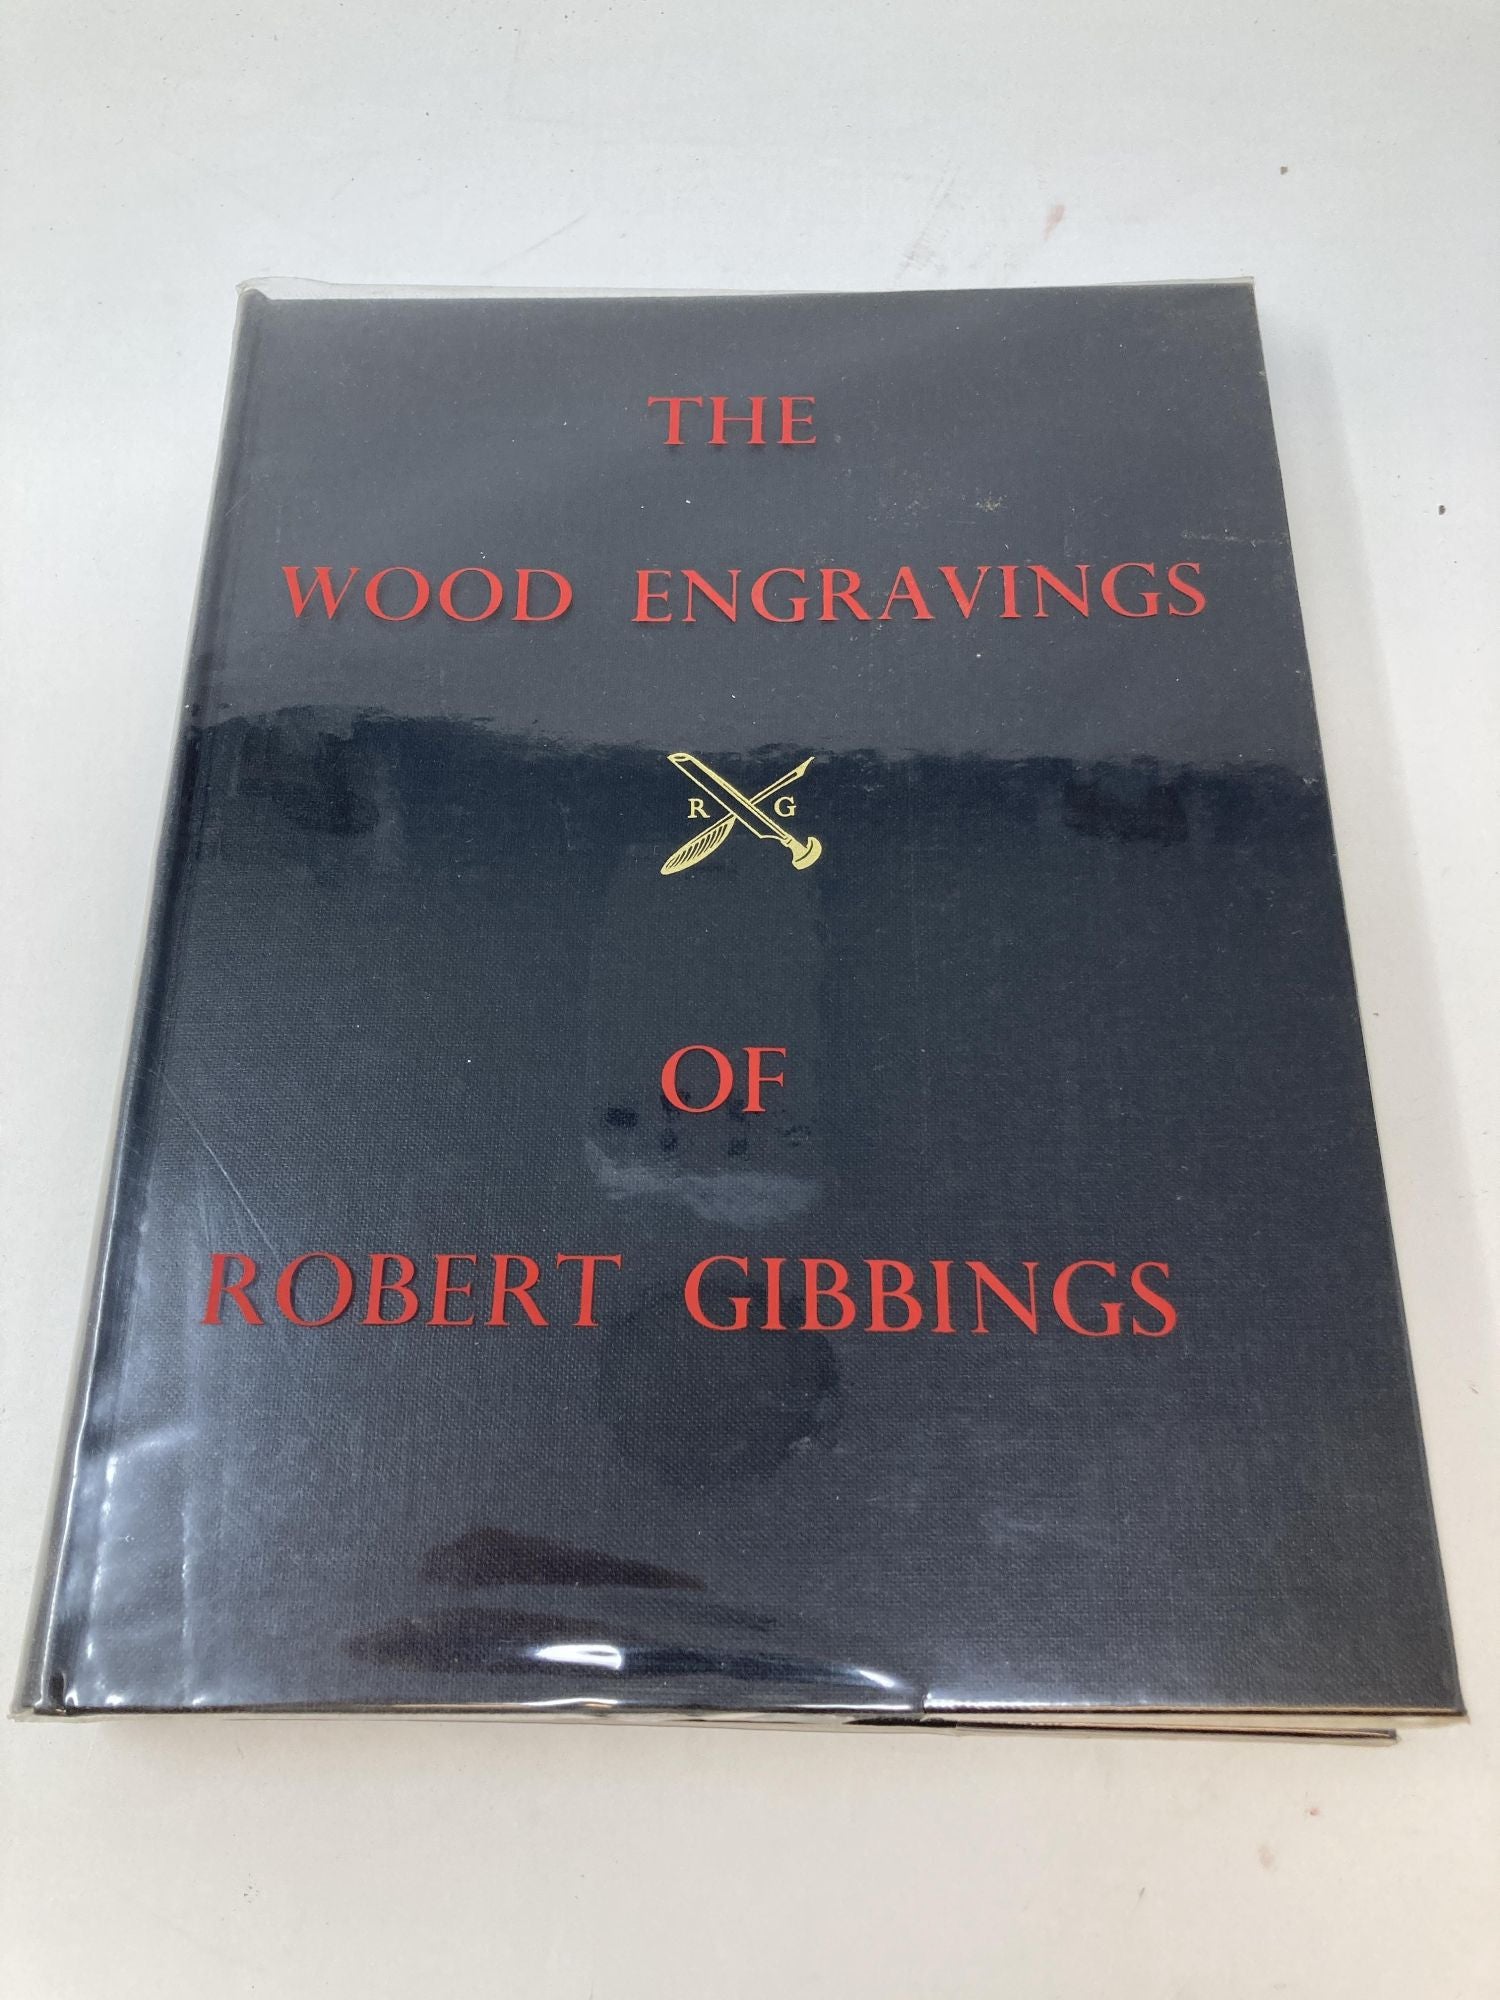 Empson, Patience - The Wood Engravings of Robert Gibbings with Some Recollections by the Artist